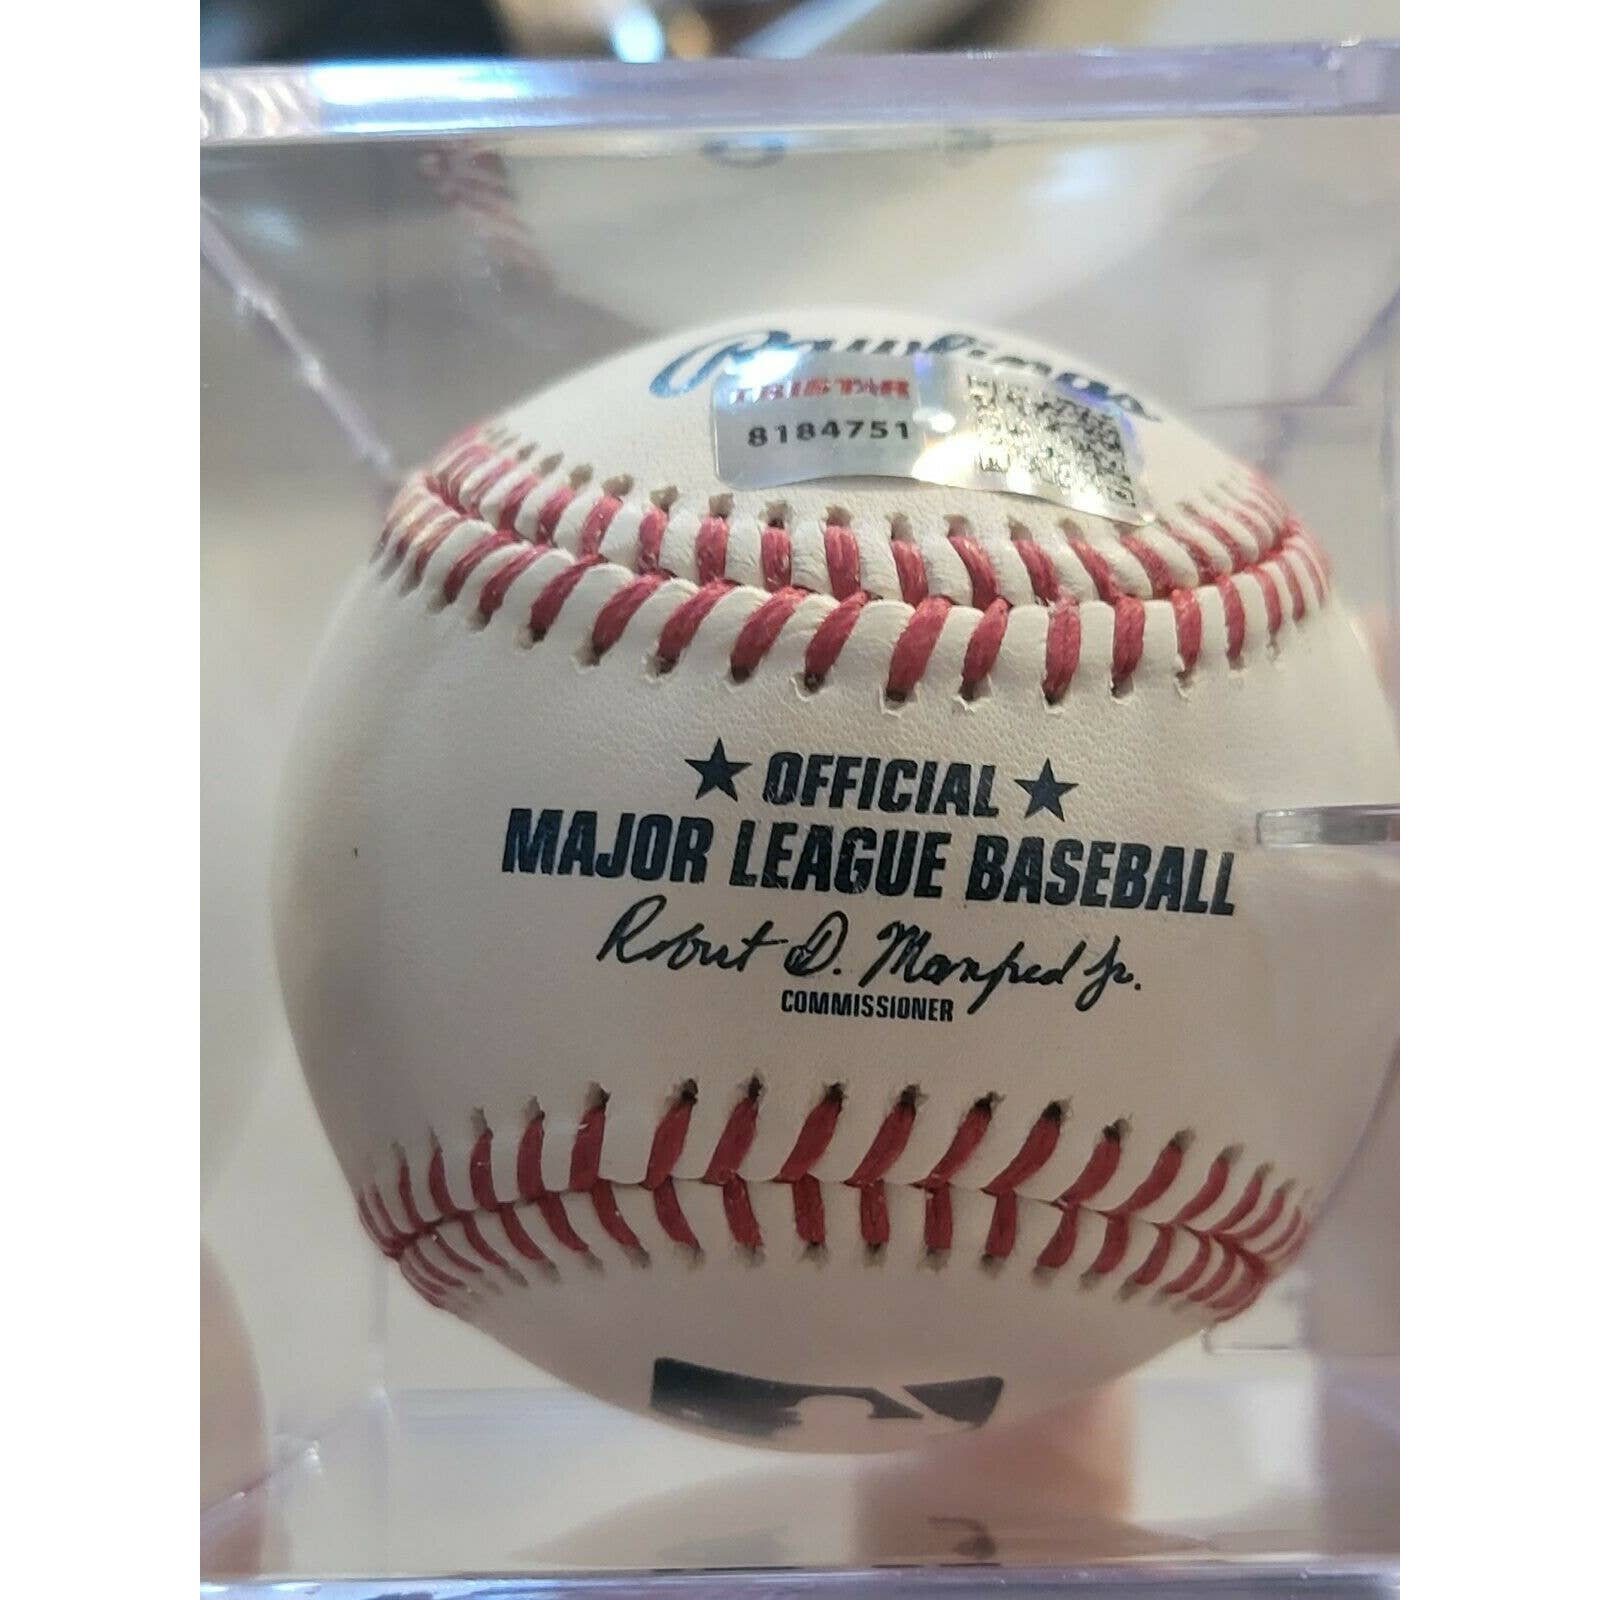 Kevin Mitchell Autographed/Signed Baseball TRISTAR - TreasuresEvolved